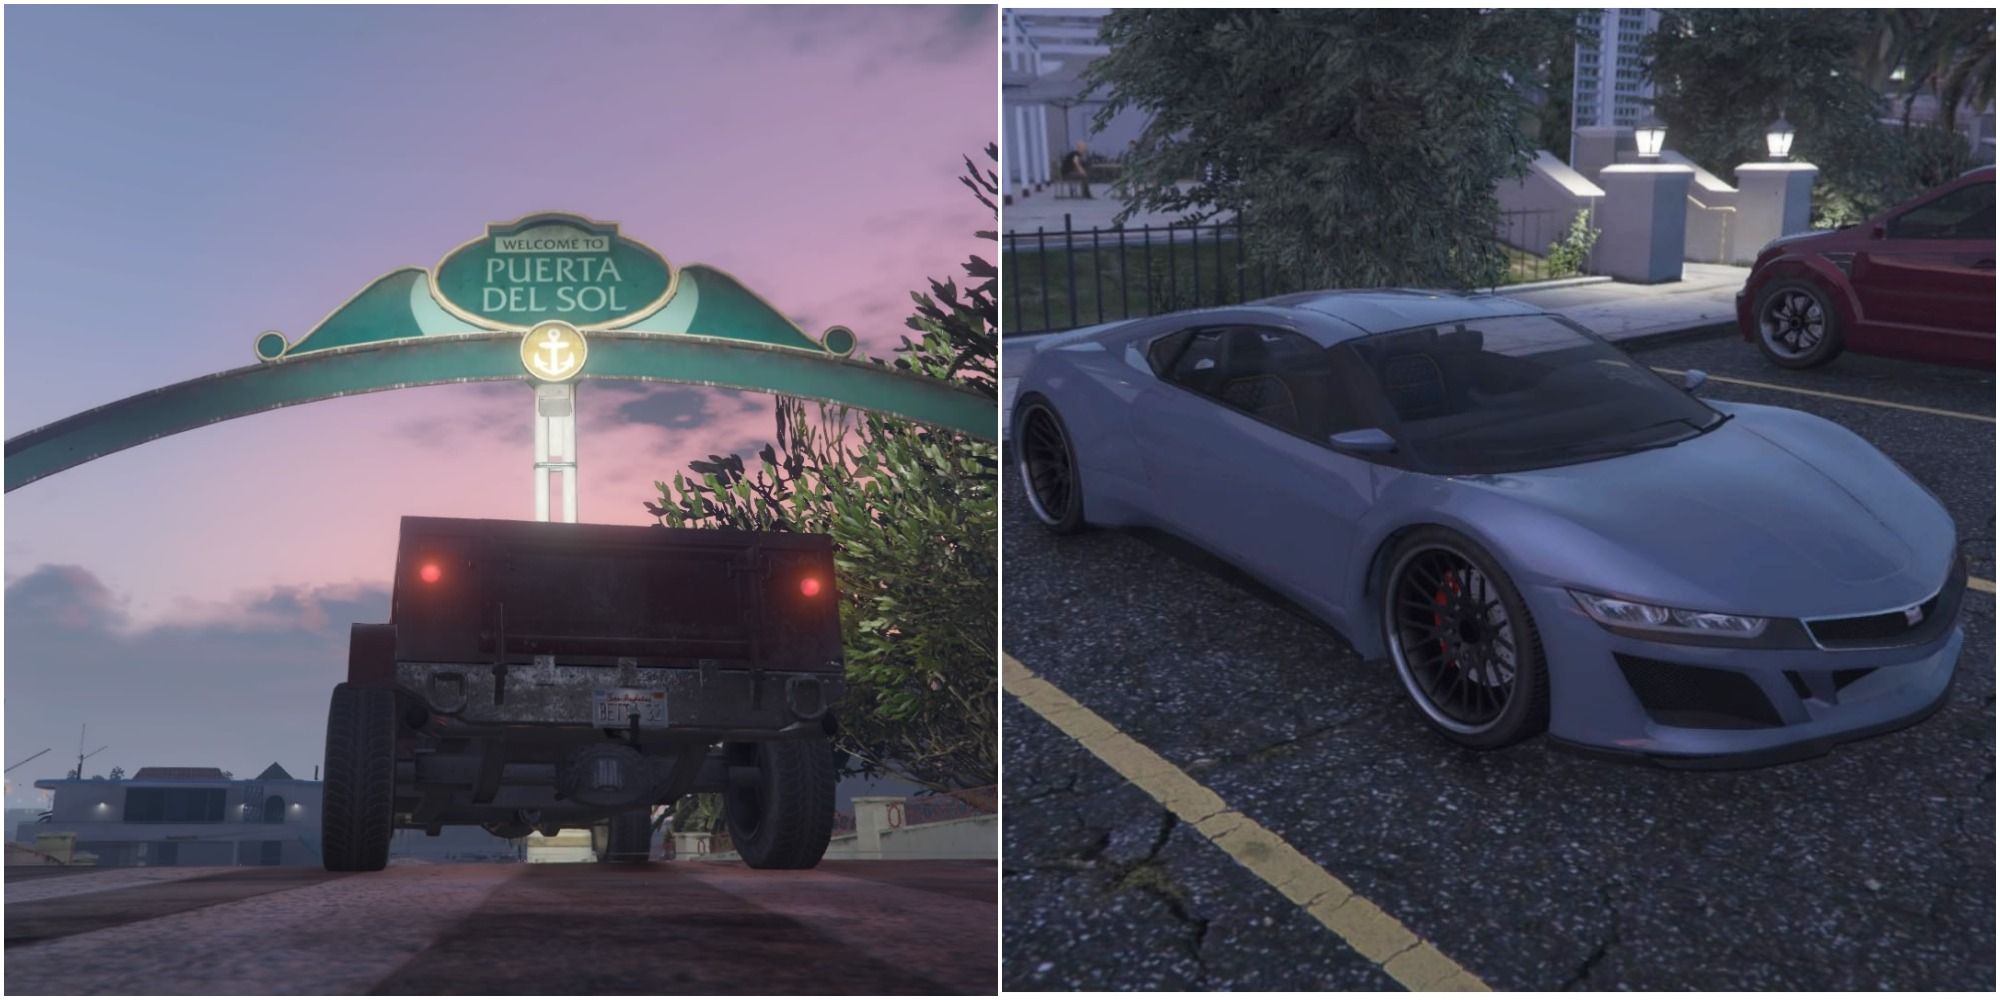 Bigger Garage in Story Mode? :: Grand Theft Auto V General Discussions